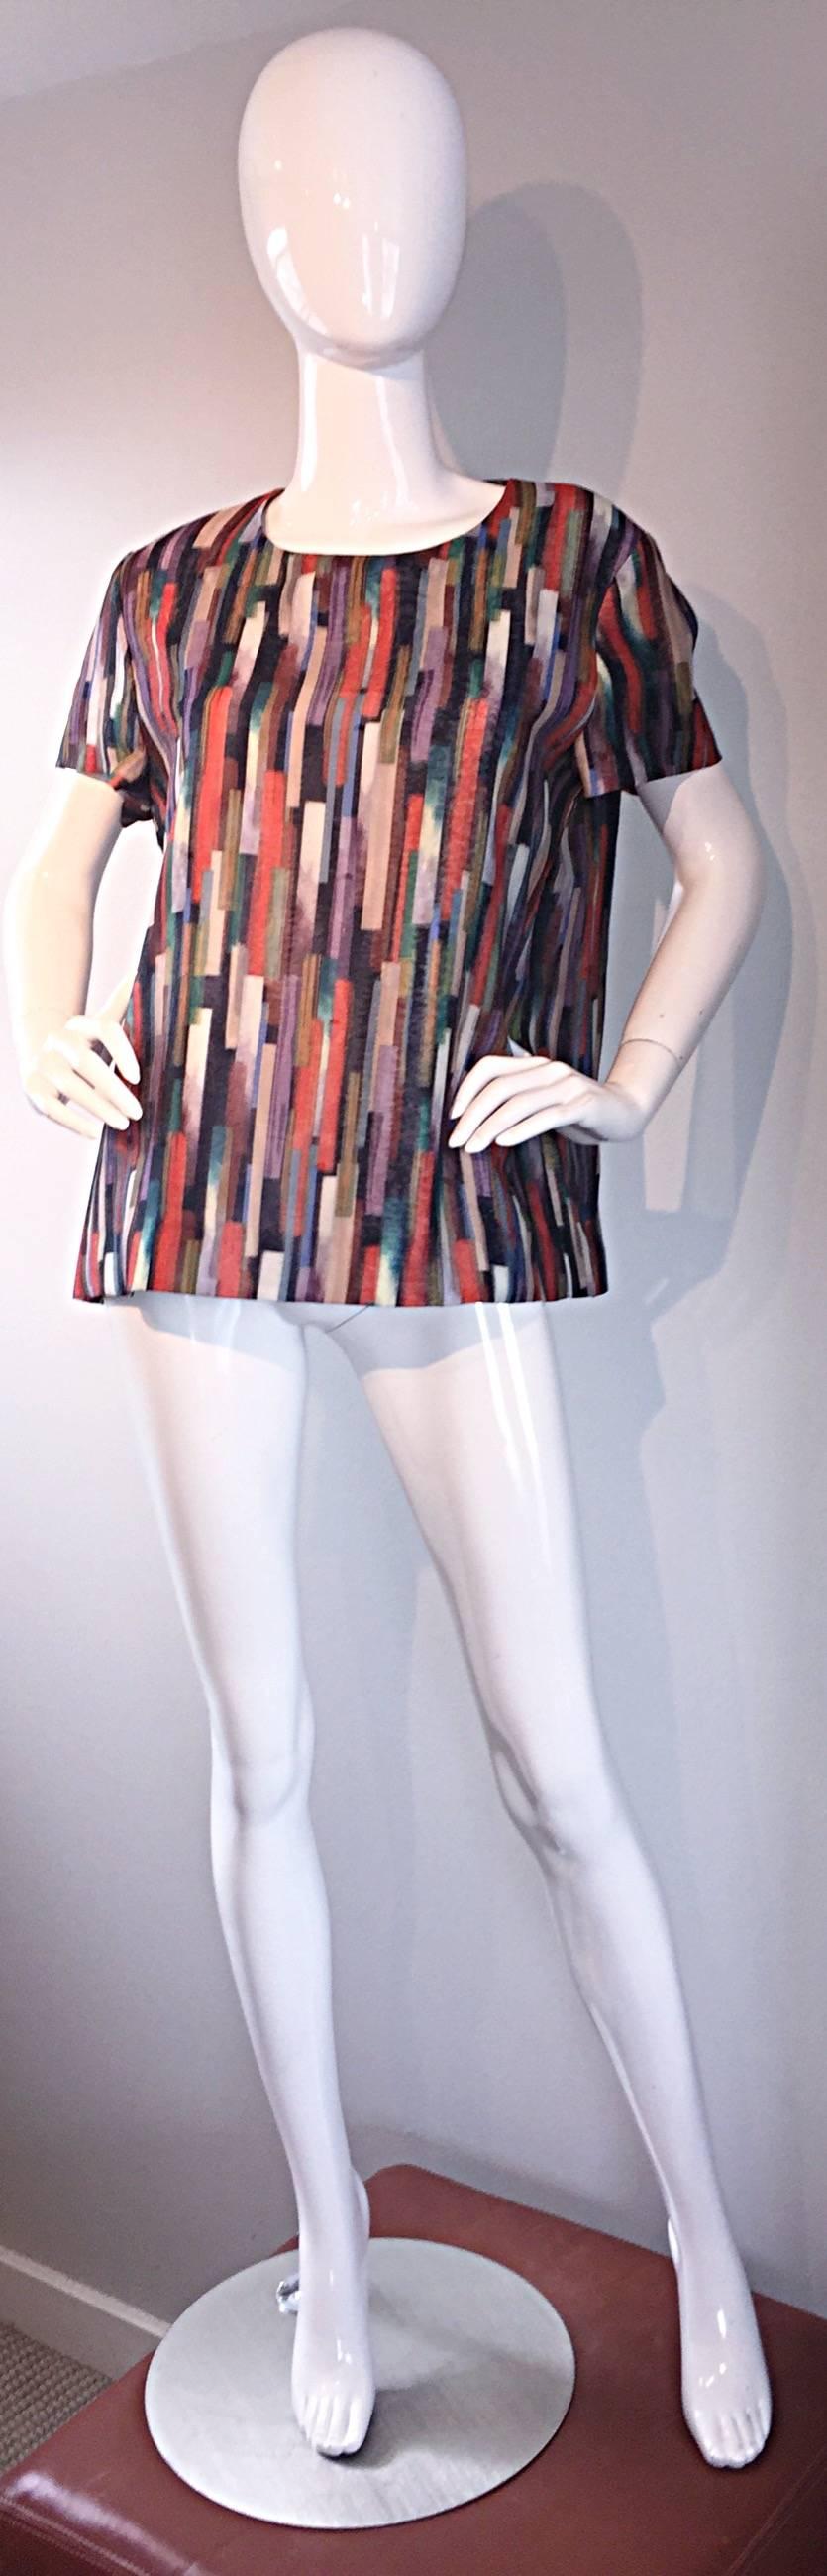 Beautiful GERARD DAREL abstract colorful swing top! Wonderful shape, that looks great on all shapes and sizes. Fitted bodice, with a flared hem. Flattering abstract print on double layered silk. Metal zipper at back neck. Looks great with jeans,